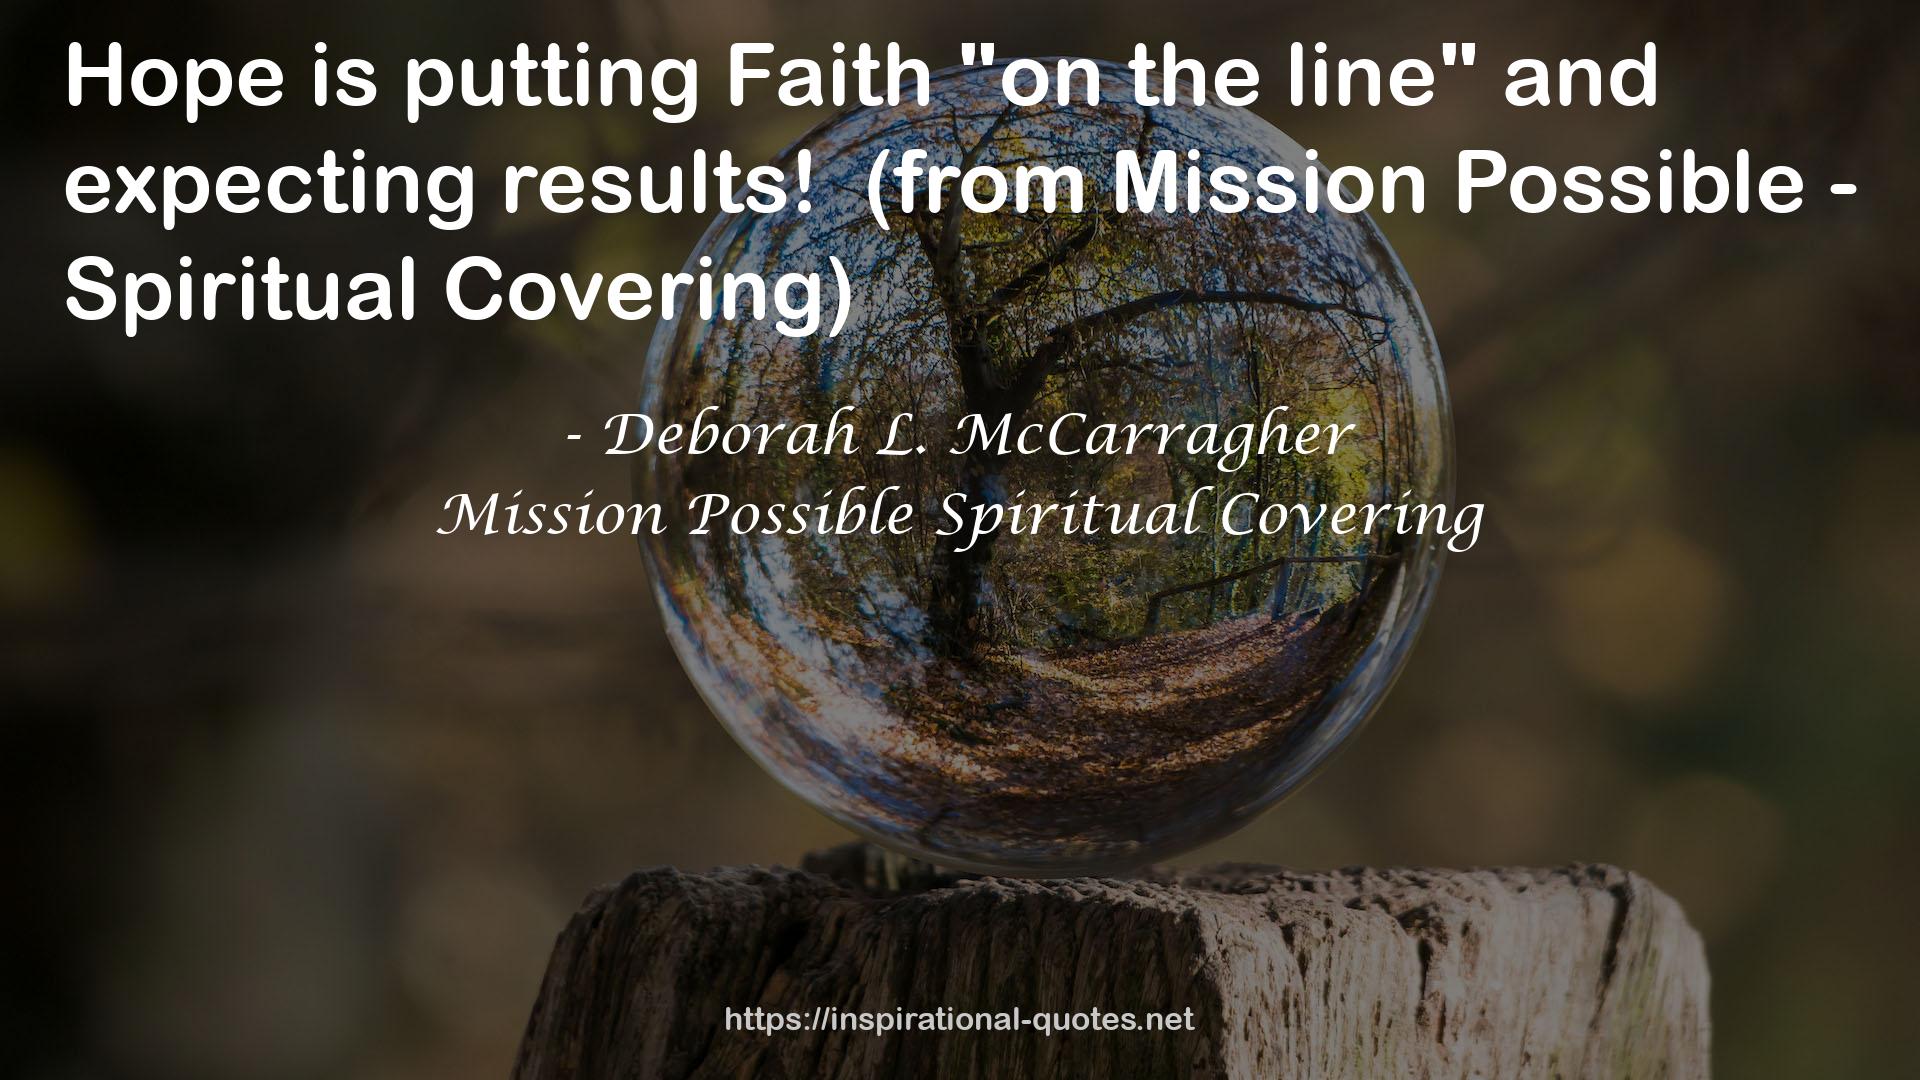 Mission Possible Spiritual Covering QUOTES